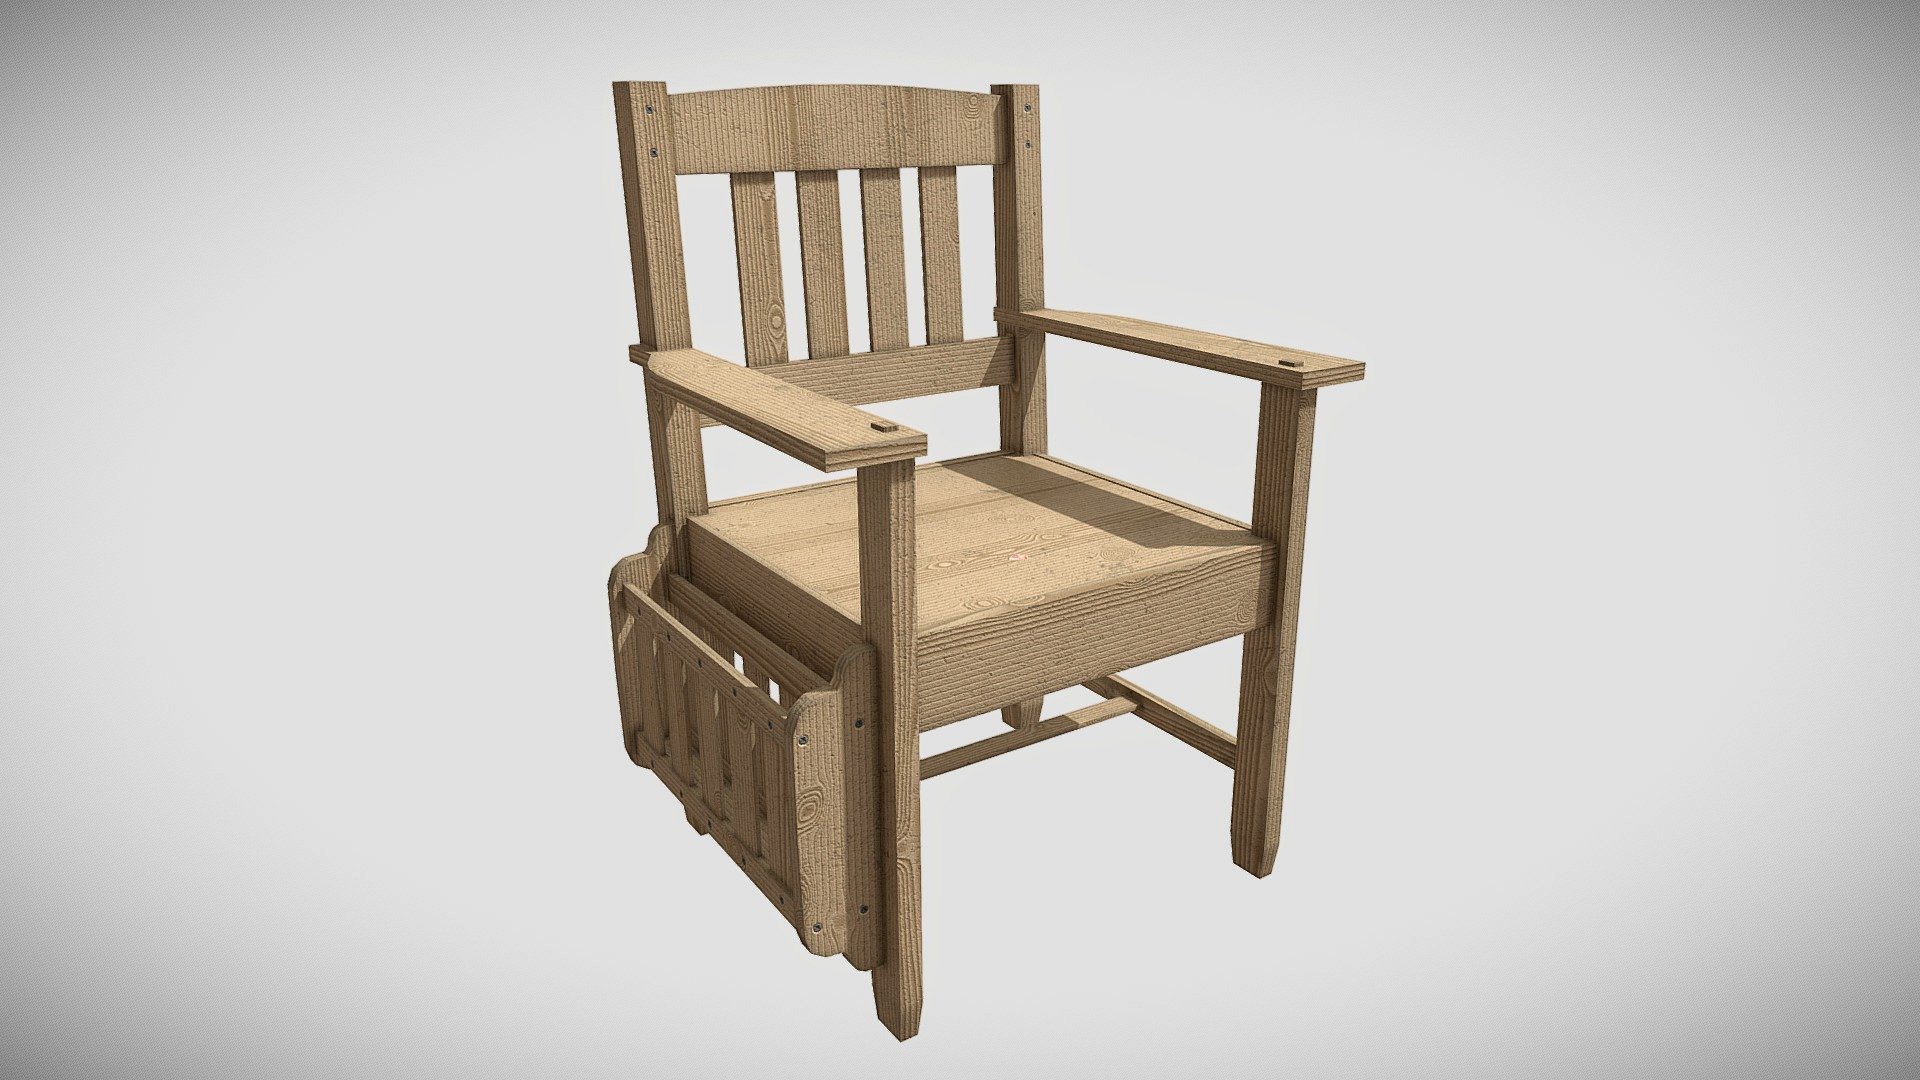 Low Poly Old Fashioned Schoolchair